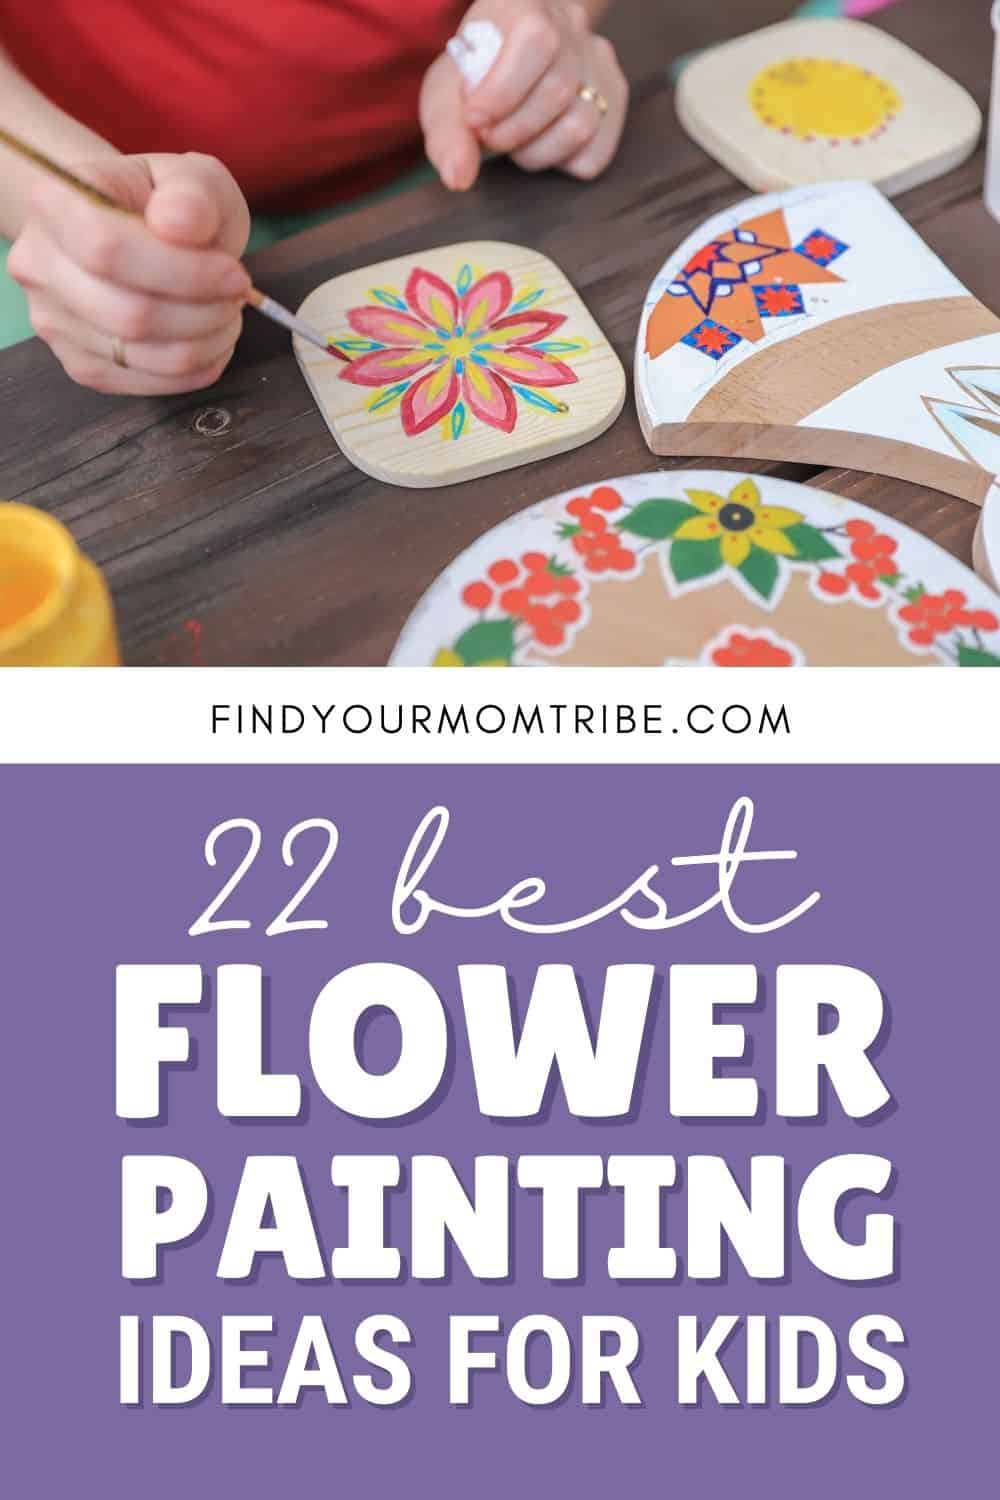 22 Best Flower Painting Ideas For Kids To Try